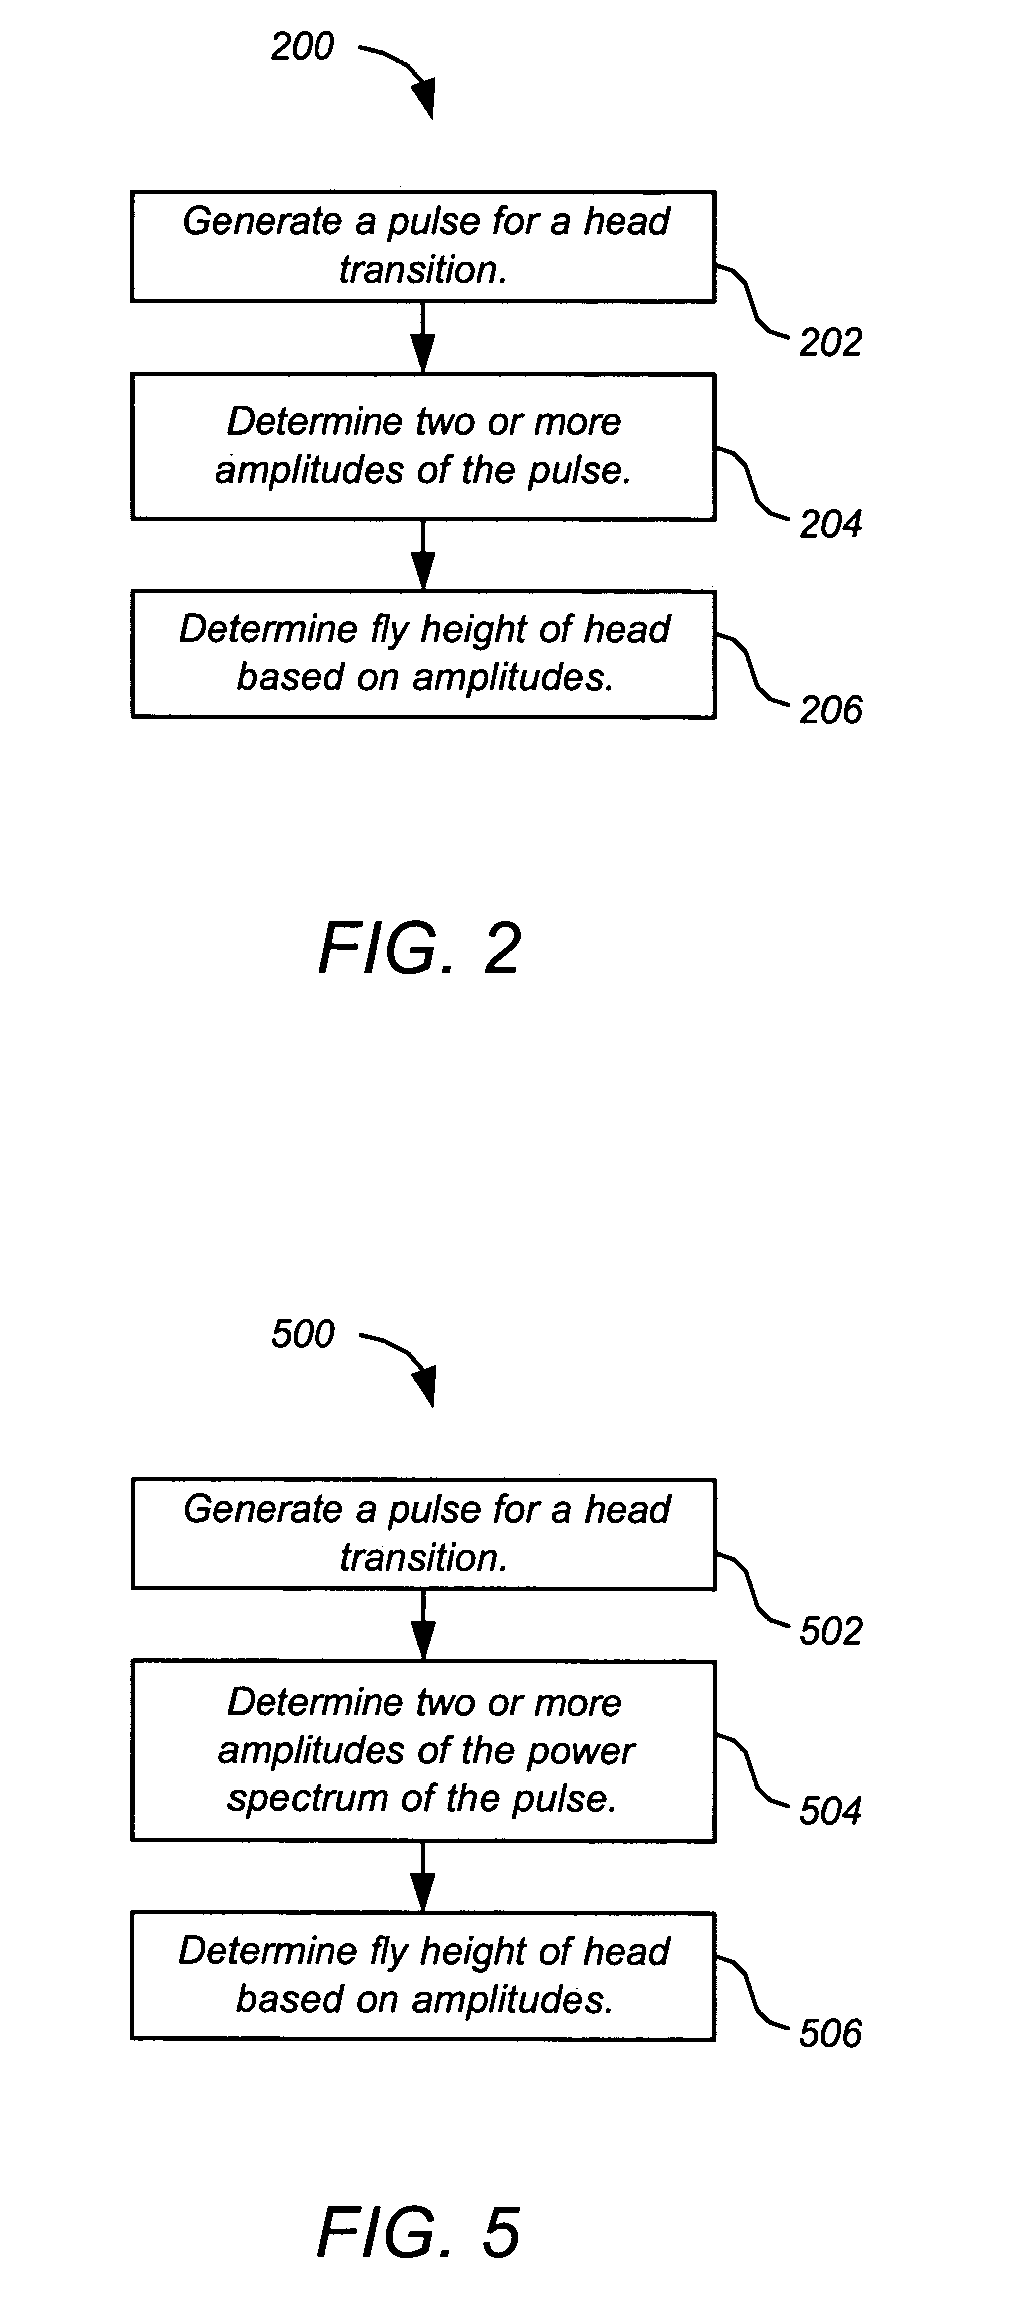 Detecting fly height of a head over a storage medium